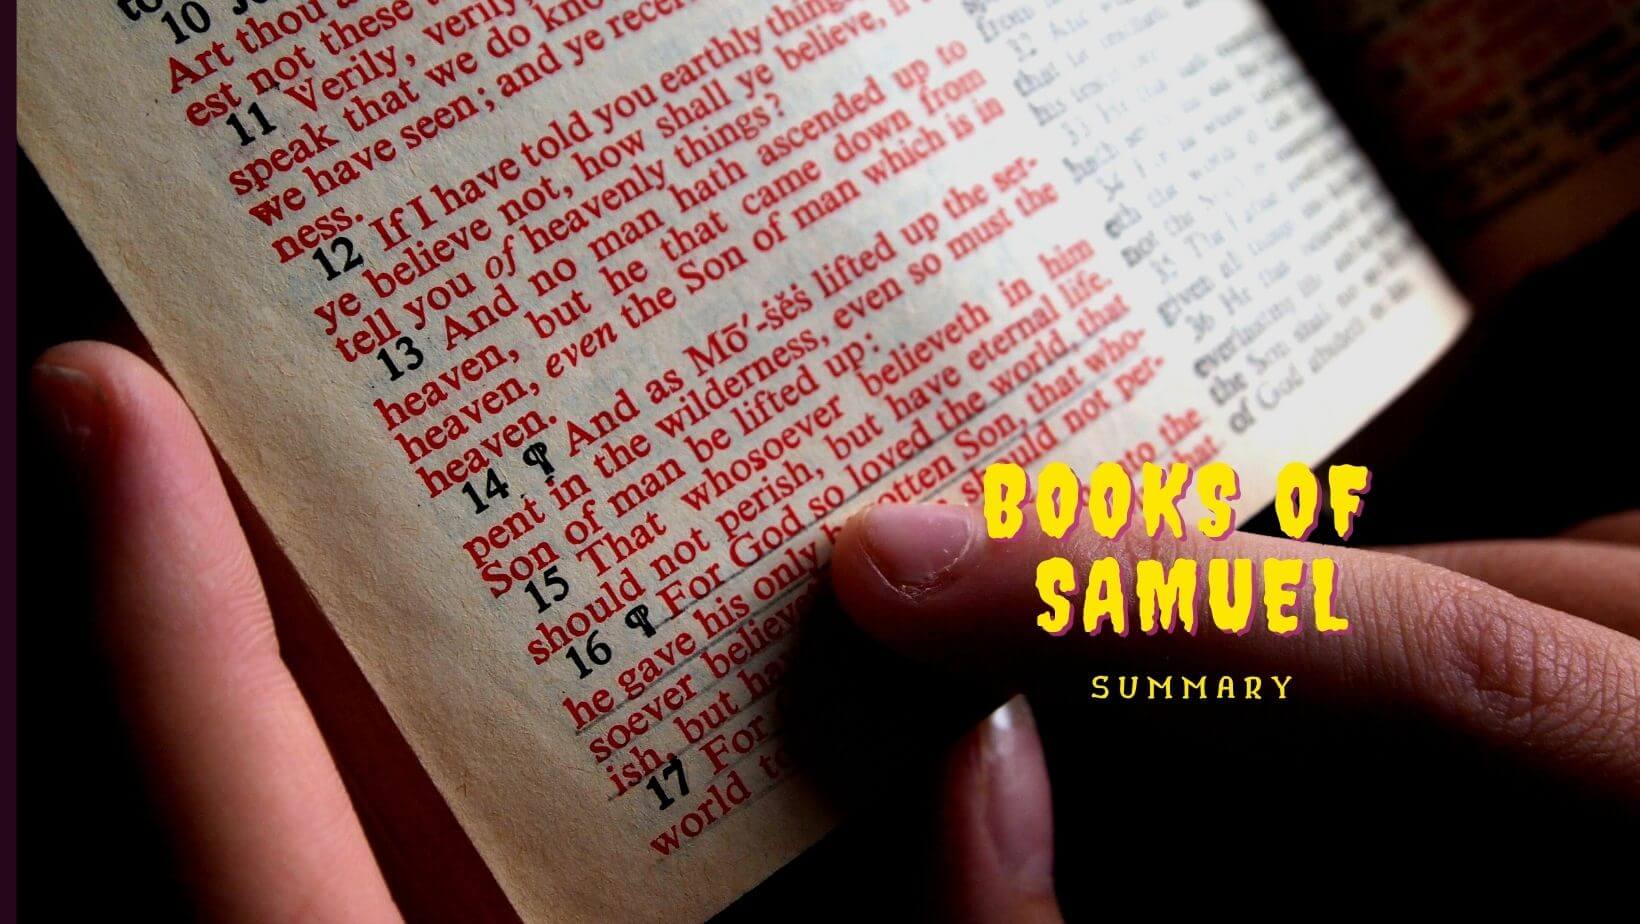 1st and 2nd Books of Samuel summary